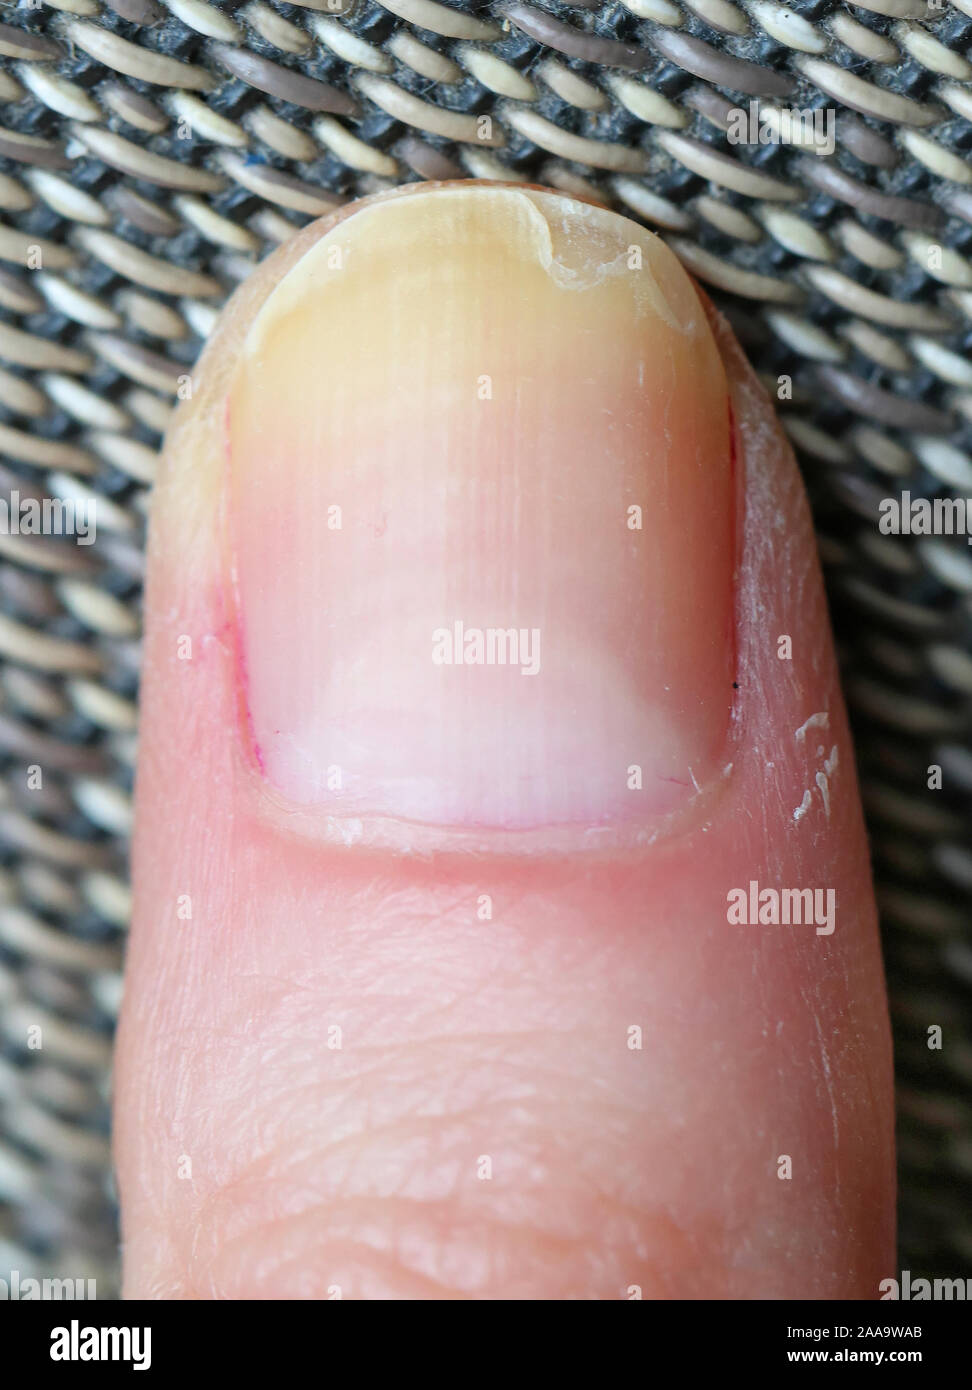 Share 125+ dry nail cuticles latest